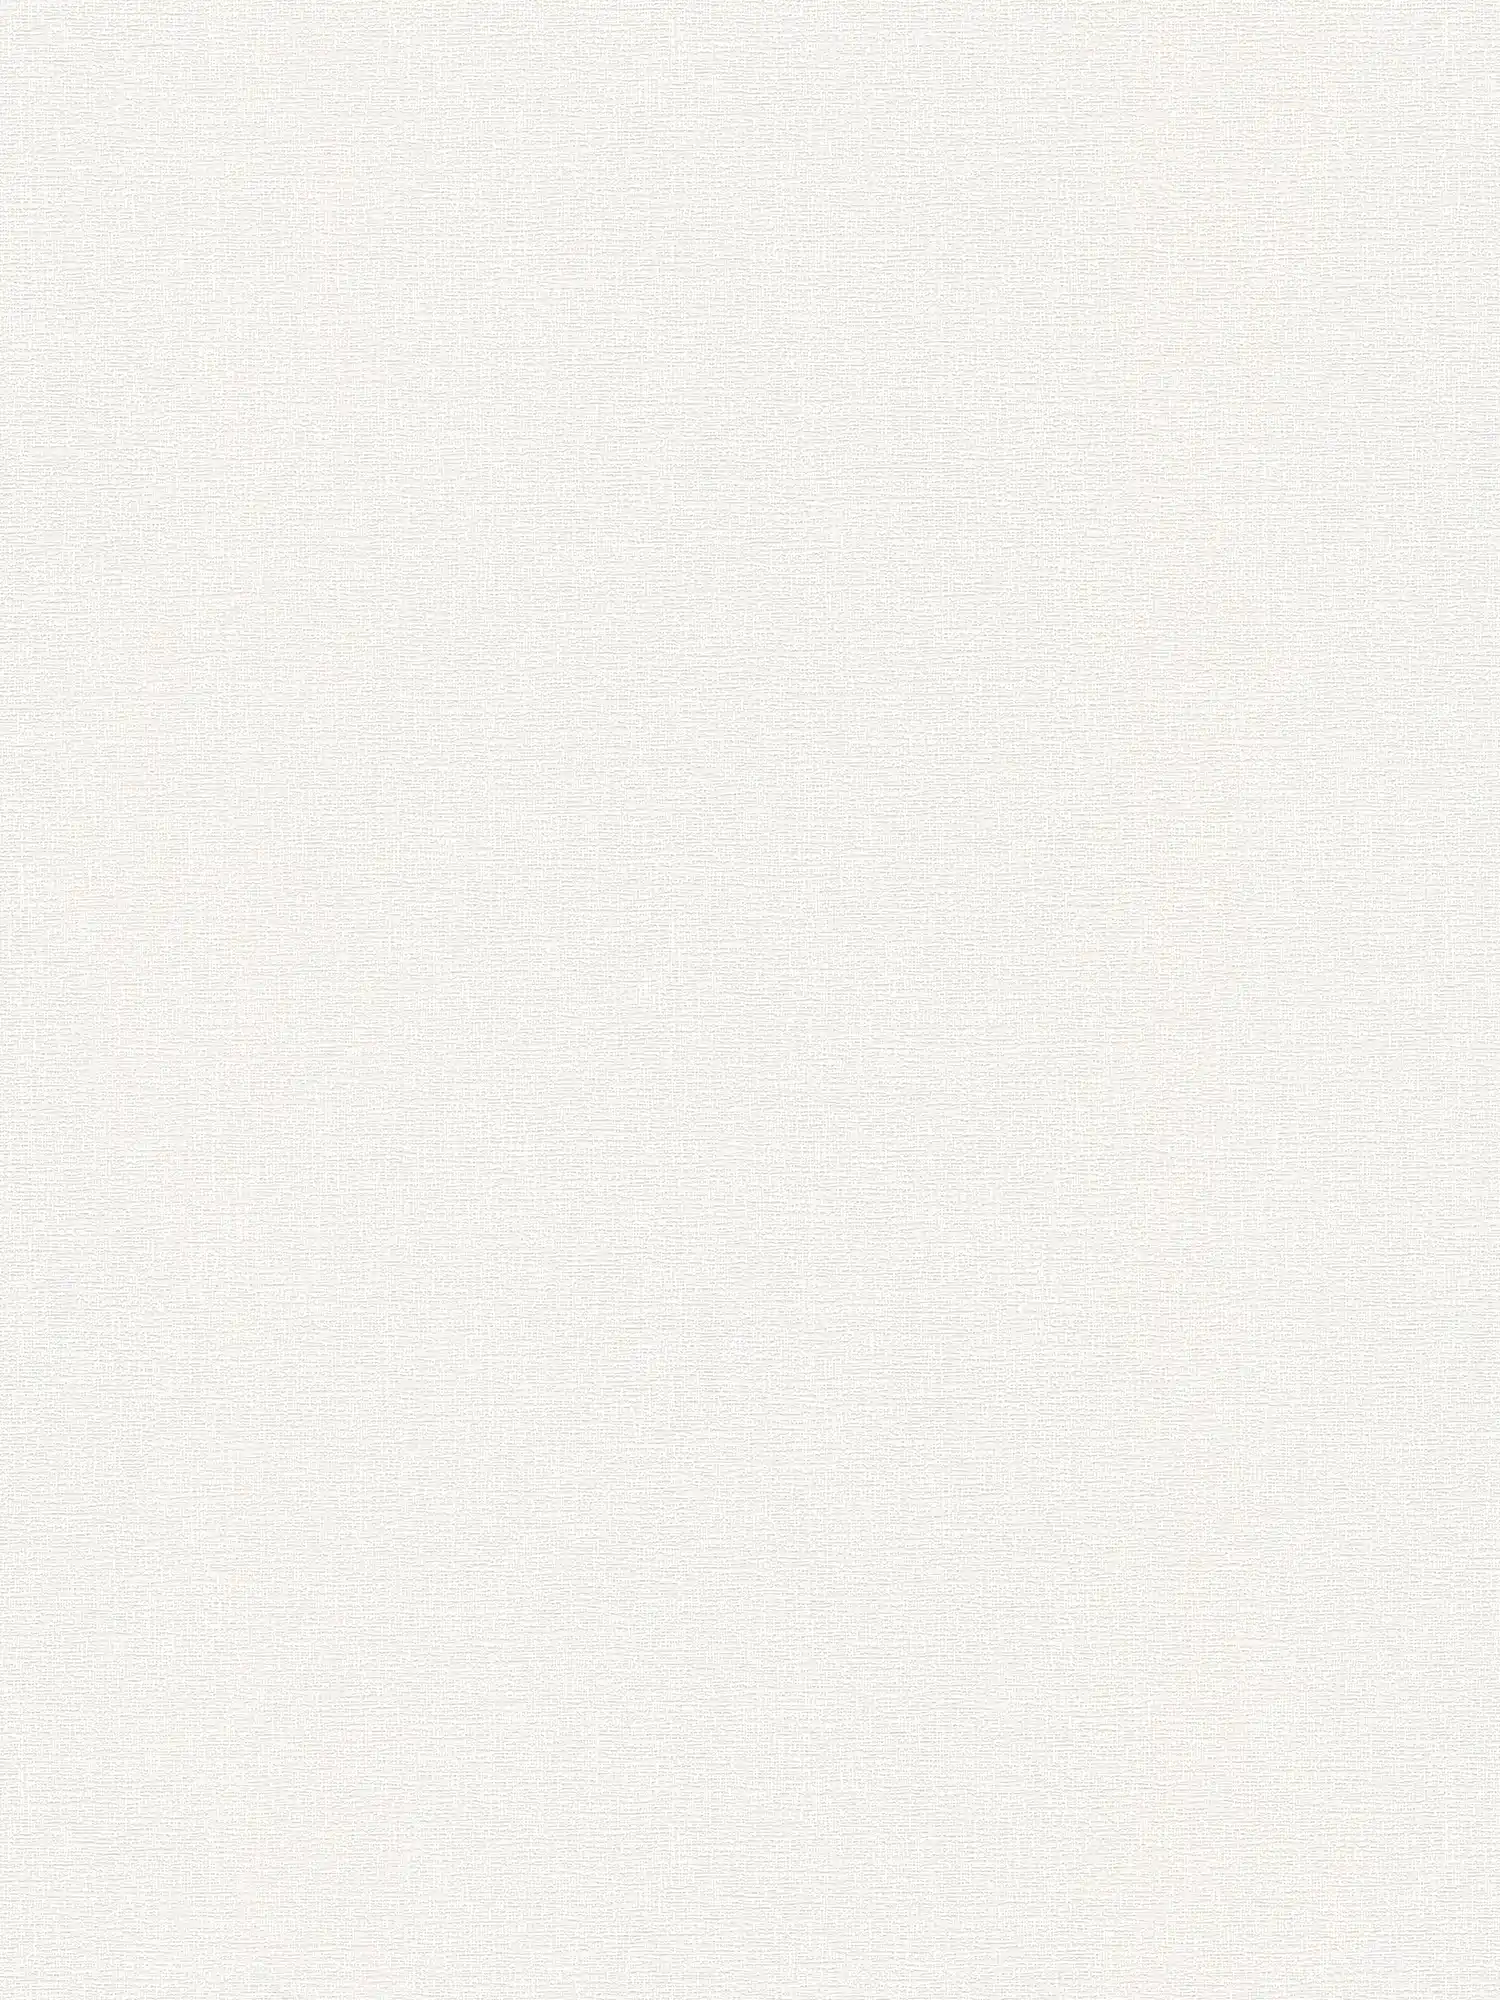 Cream wallpaper plain with natural texture
